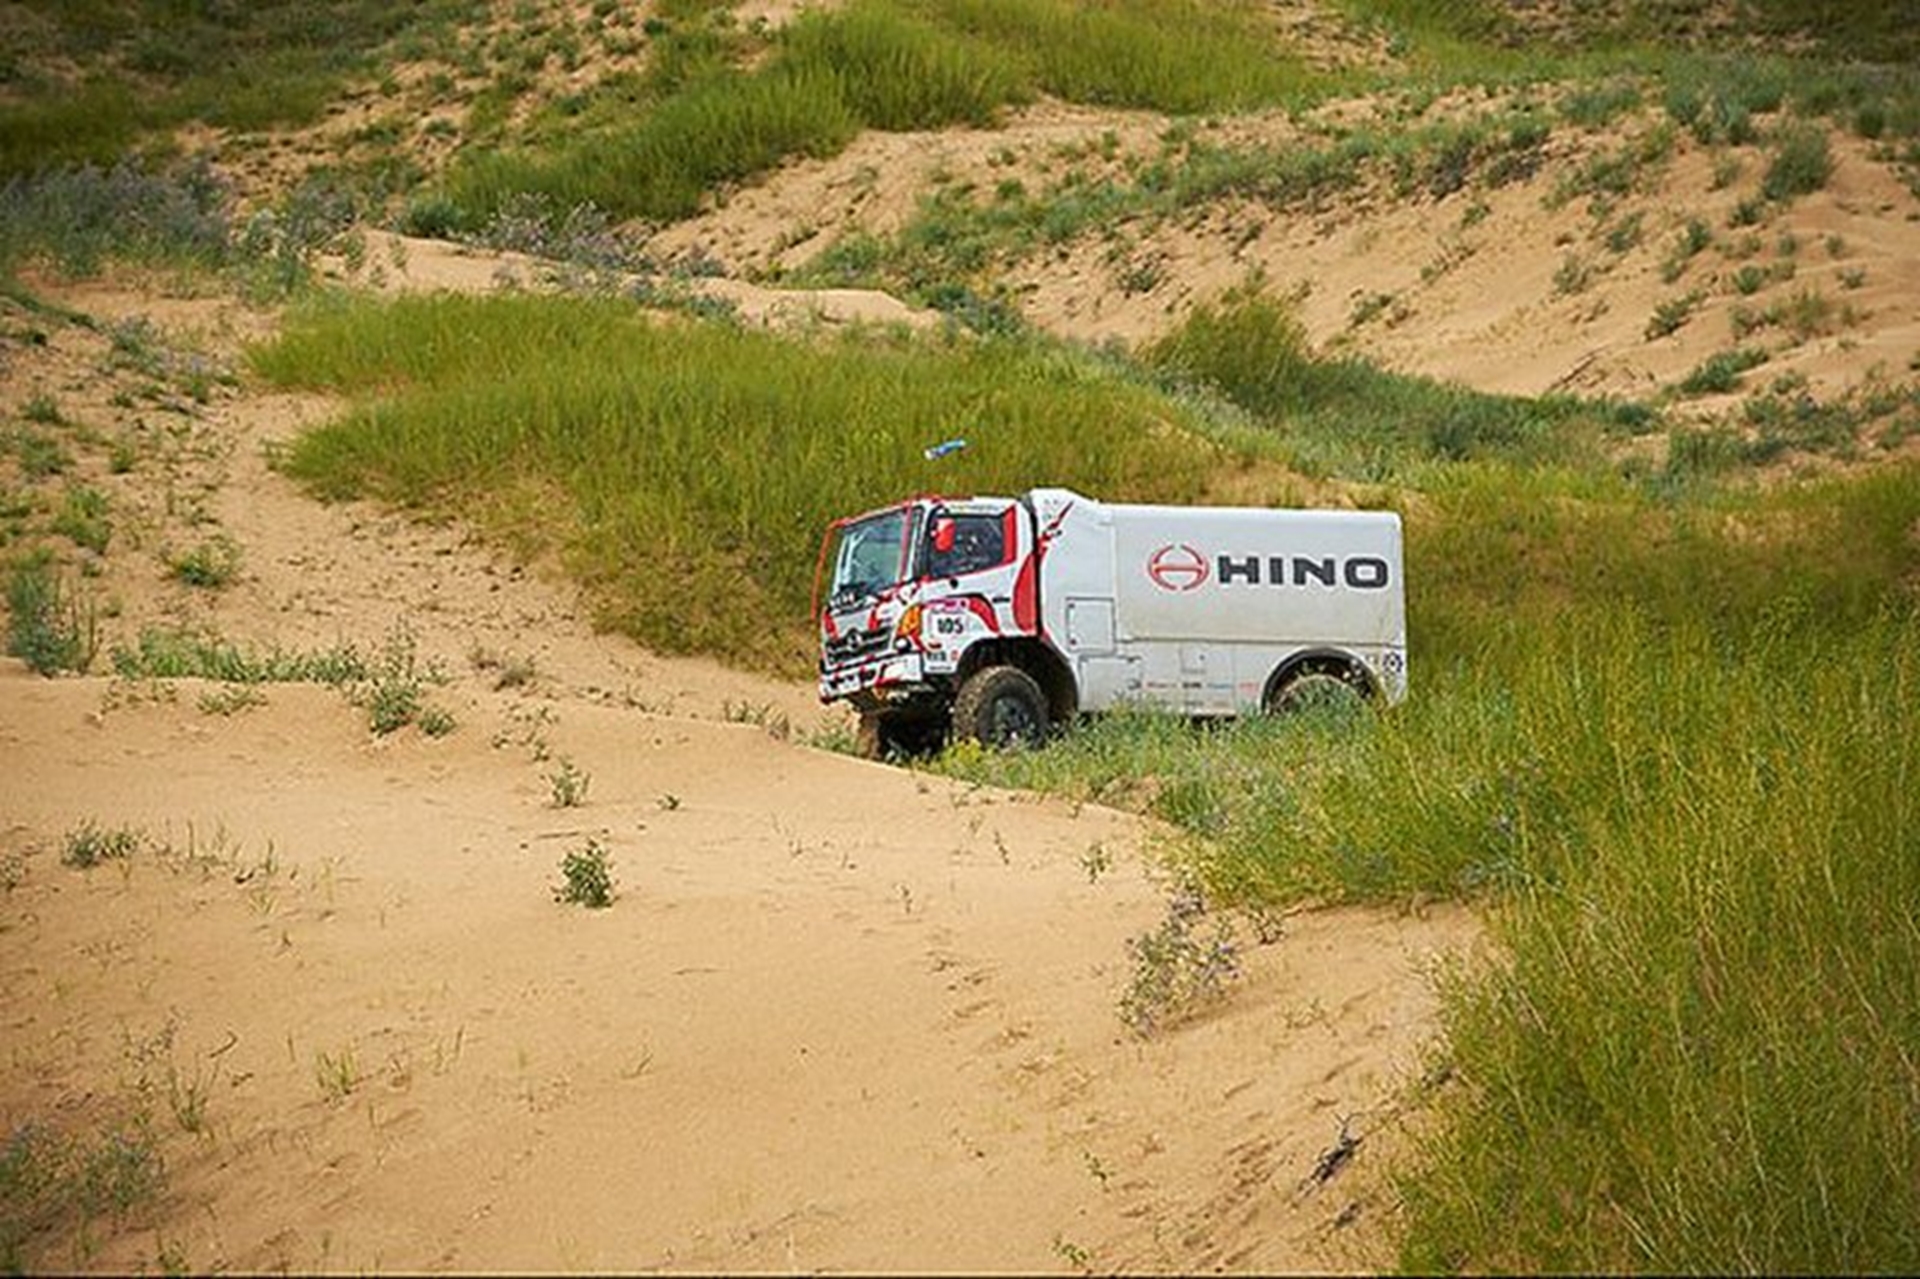 NEW HINO RACE TRUCK EXHIBITS EXCELLENT POTENTIAL IN RALLY MONGOLIA 2011